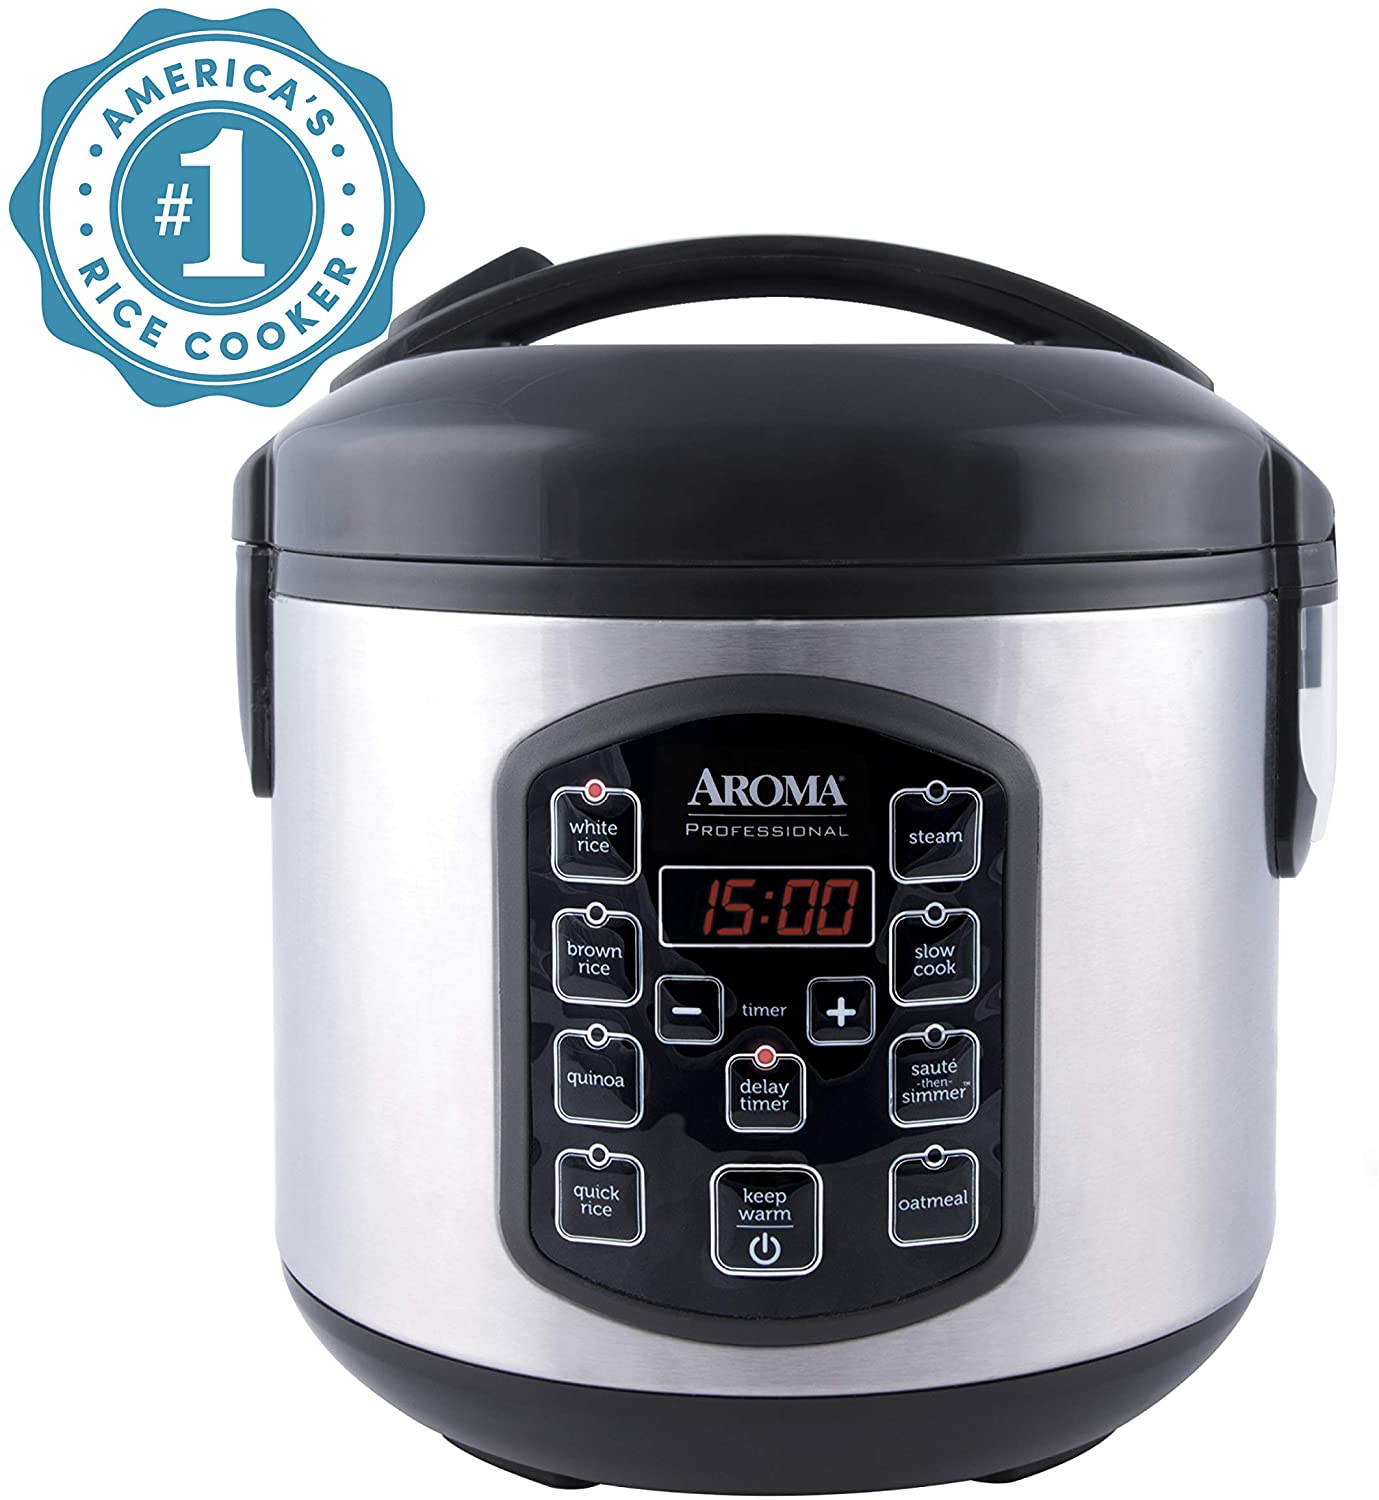 Aroma Housewares ARC-954SBD Rice Cooker, 4-Cup uncooked 2.5 Quart, Professional Version